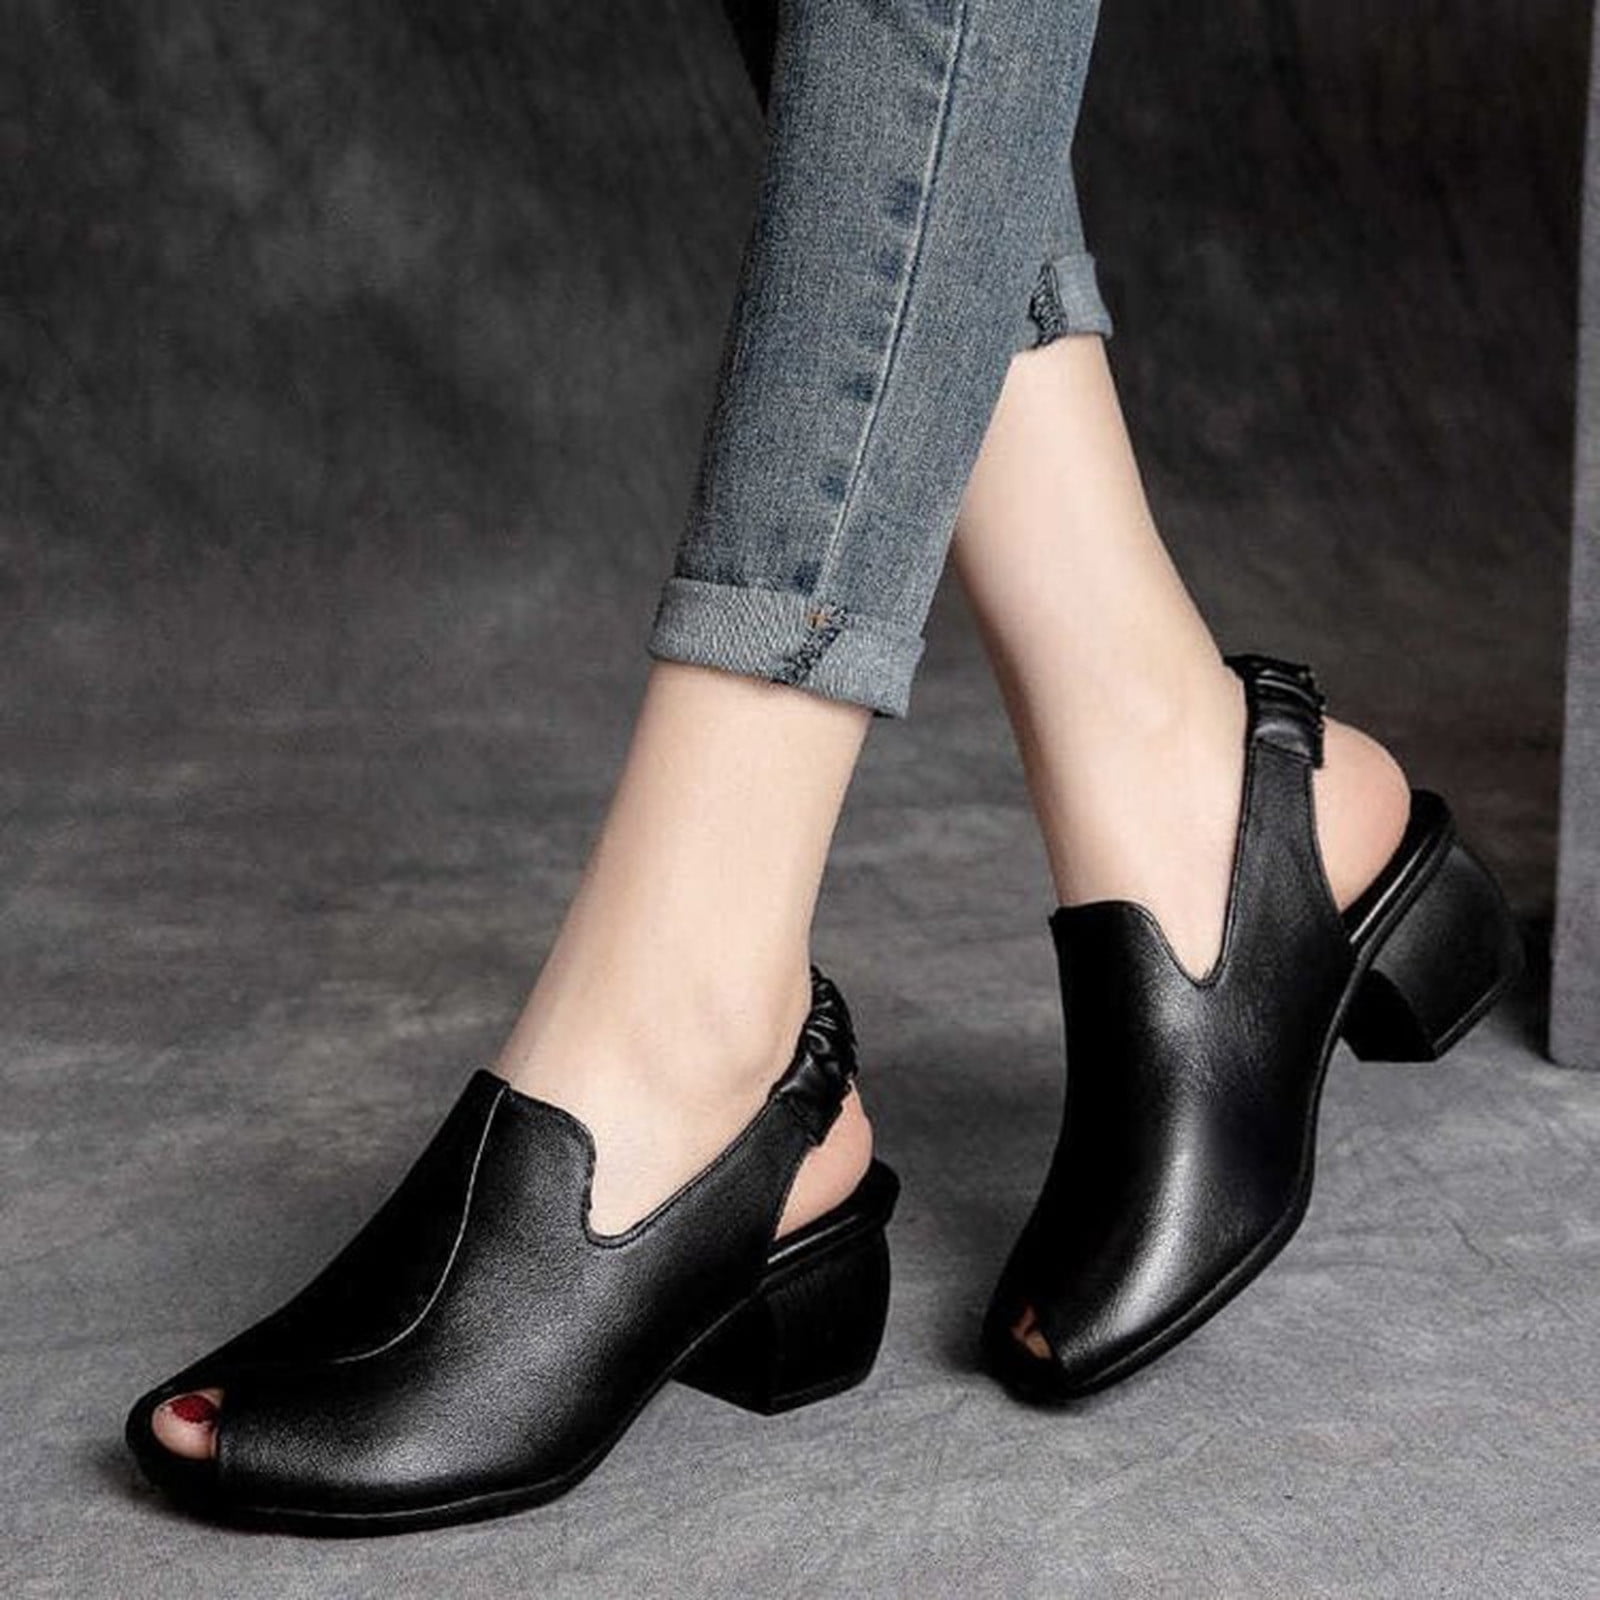 arch support dress shoes women